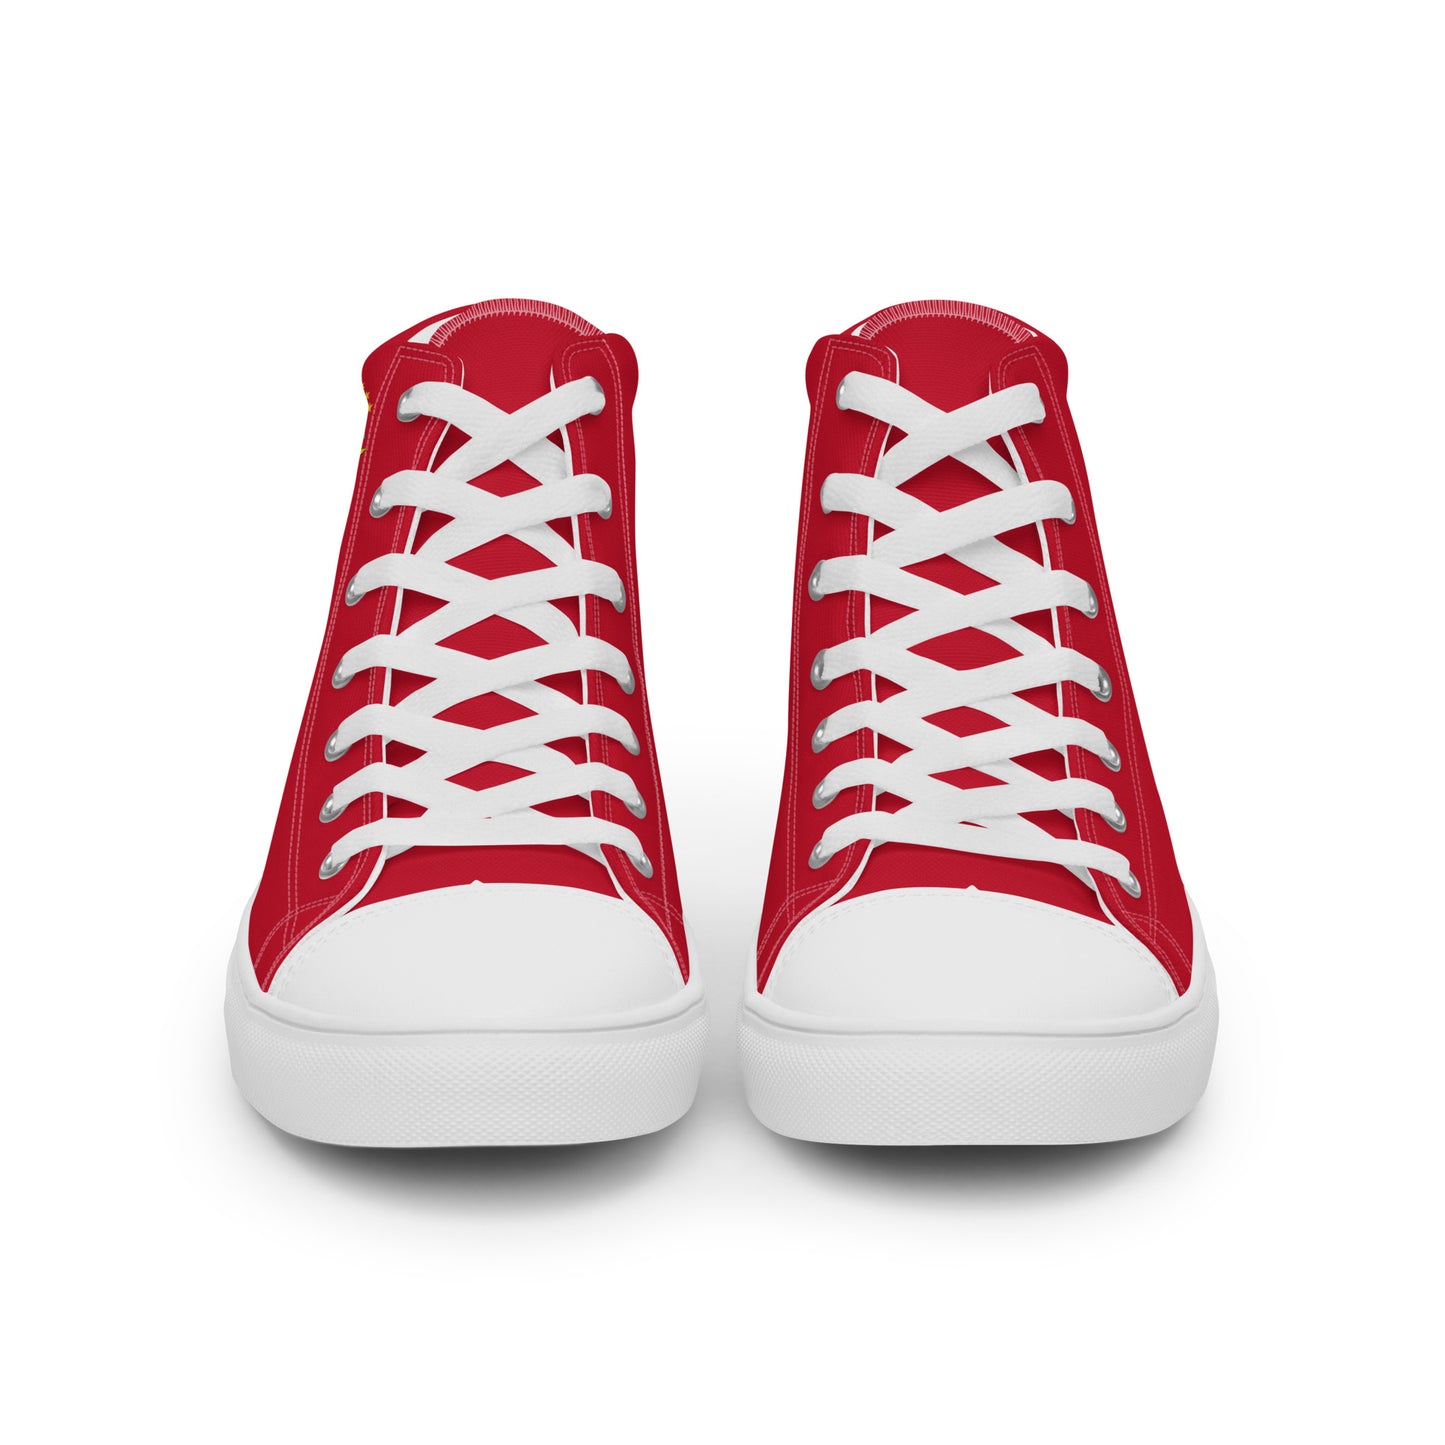 Panamá - Men - Red - High top shoes